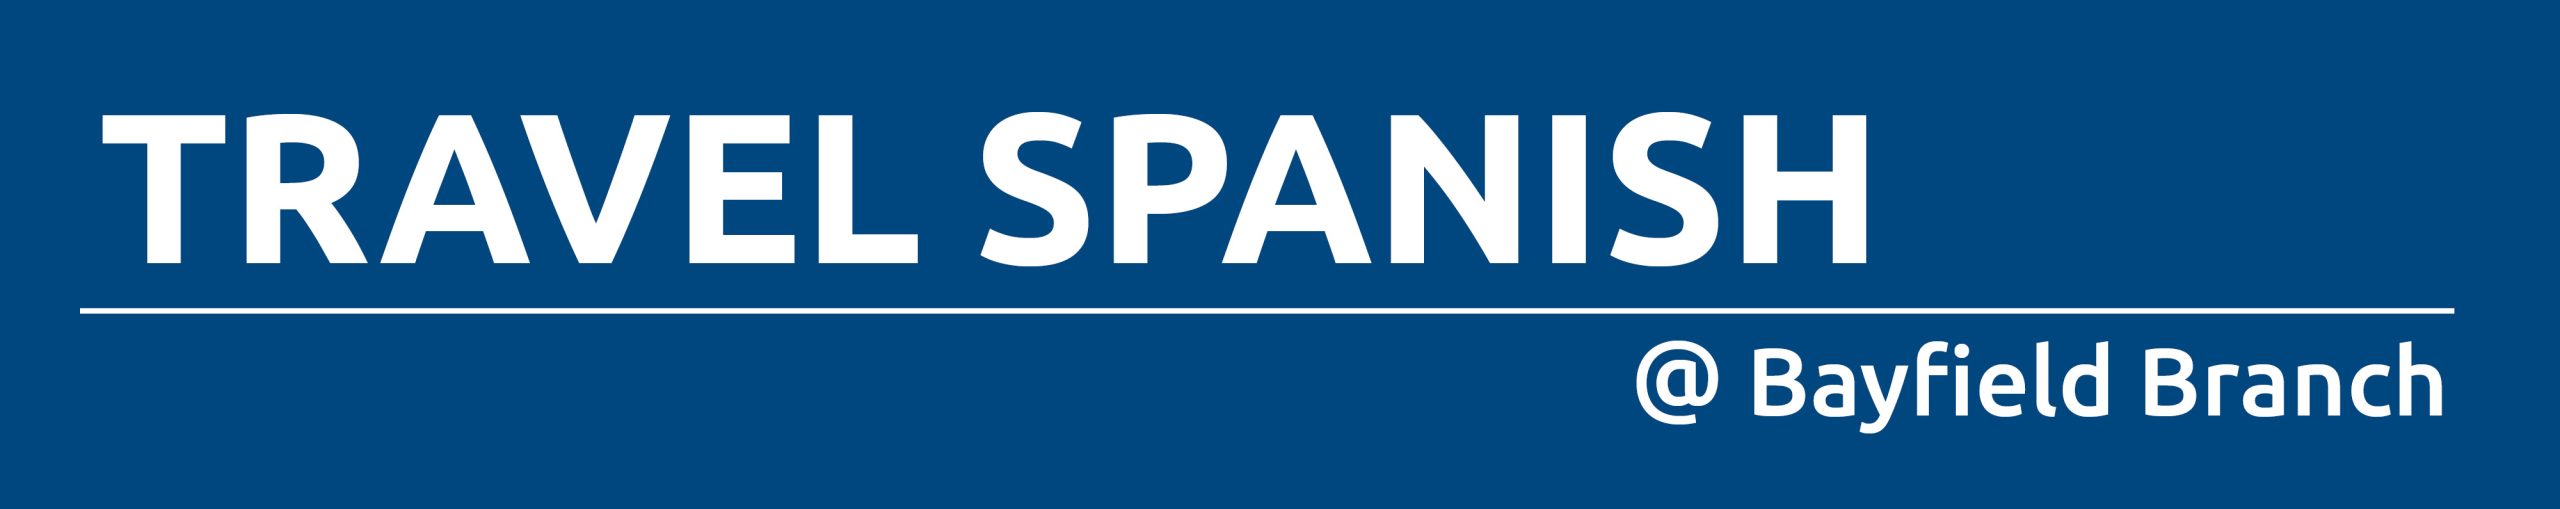 Dark blue rectangle with text promoting Travel Spanish at Bayfield Branch